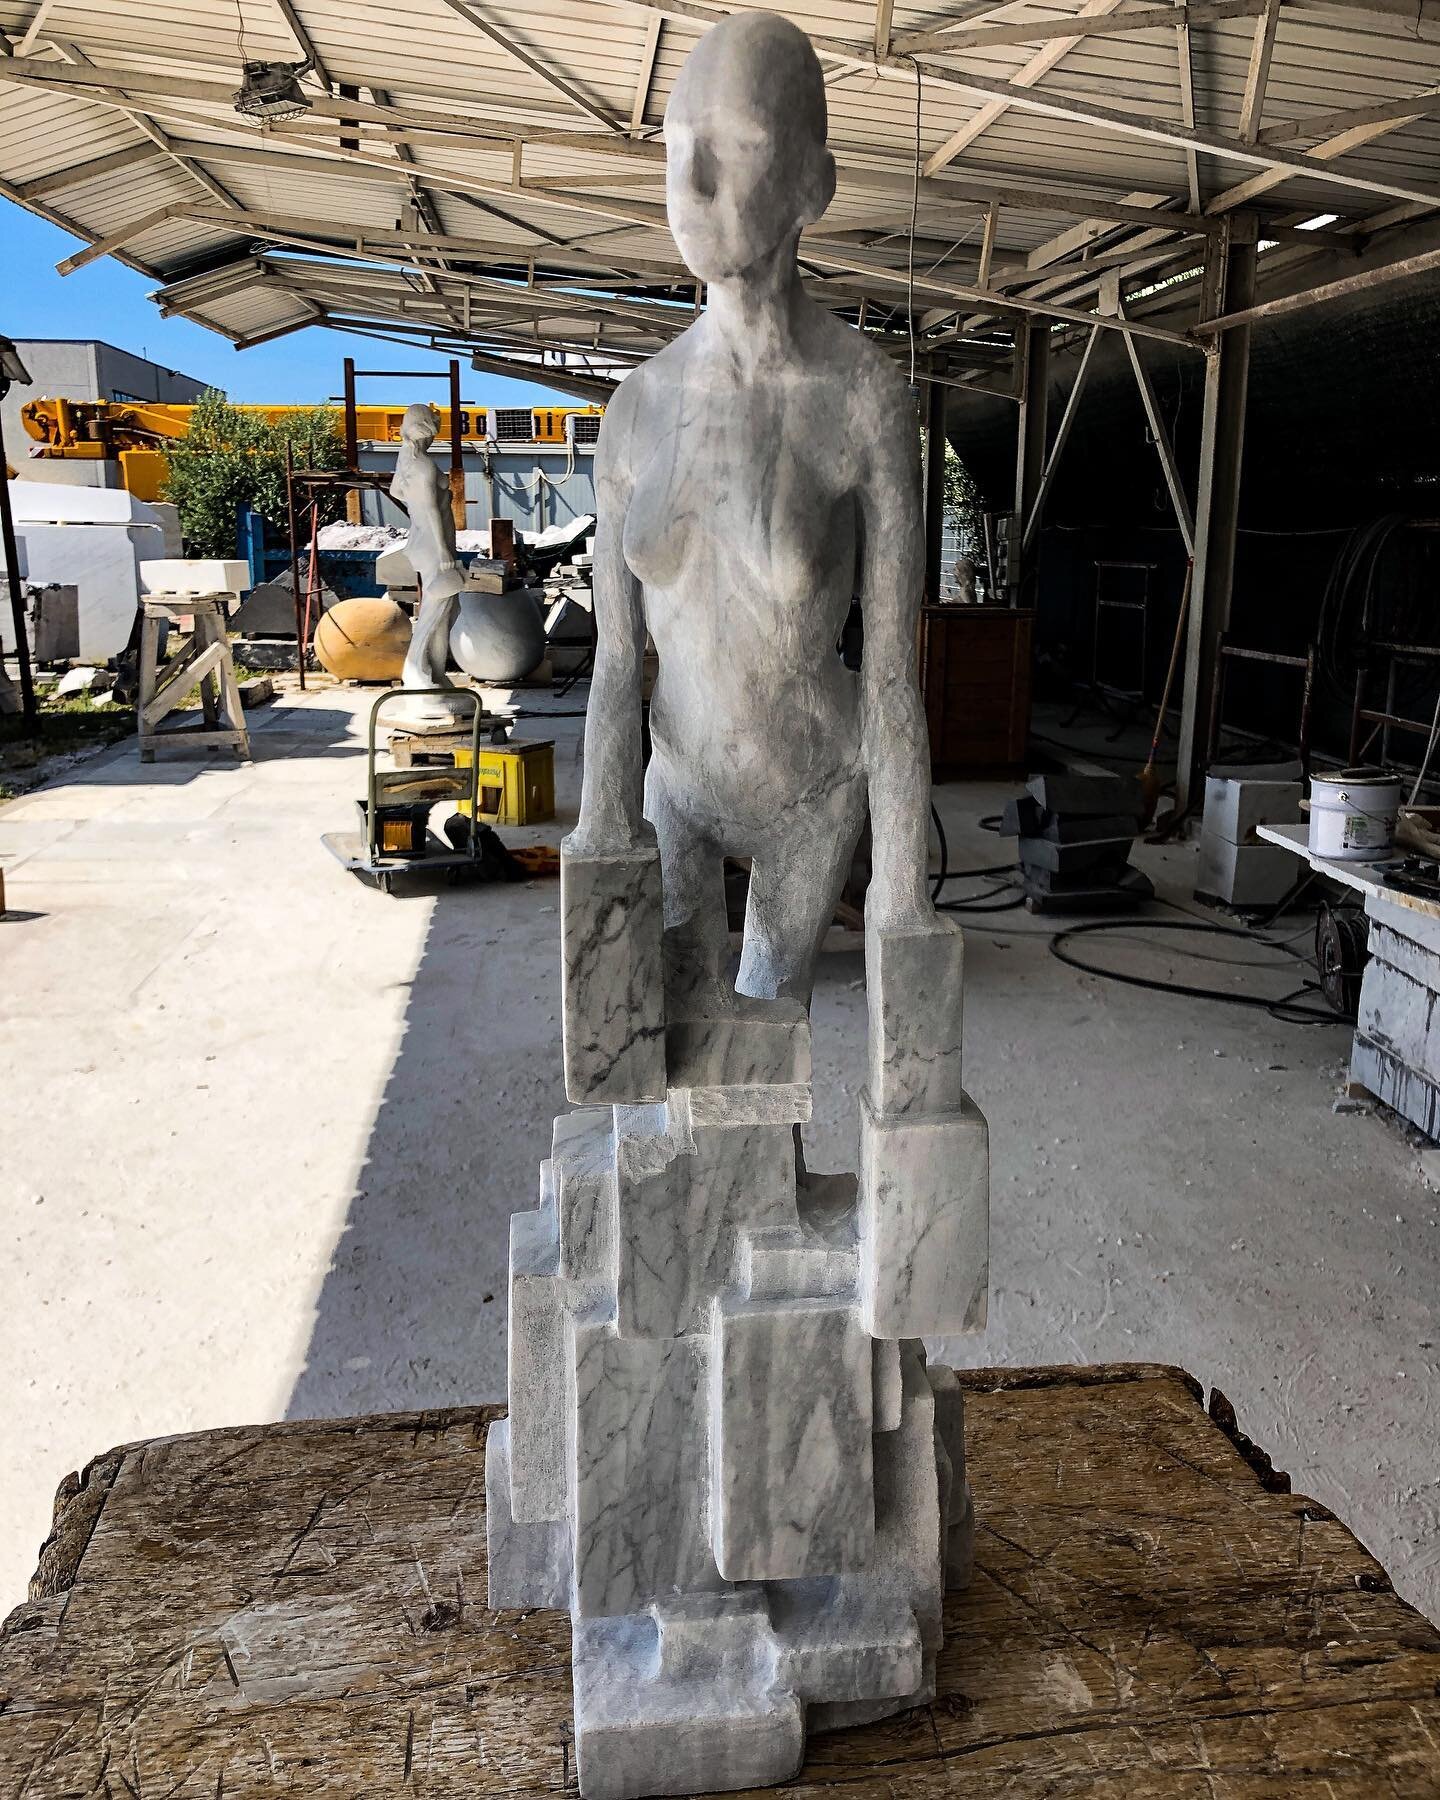 This morning we wrapped up our time in Carrara, Italy, and I can't emphasize enough what an amazing experience it has been. This piece still has a bit of work left to do, but I have learned so much about stonecarving and gained a new aporeciation for